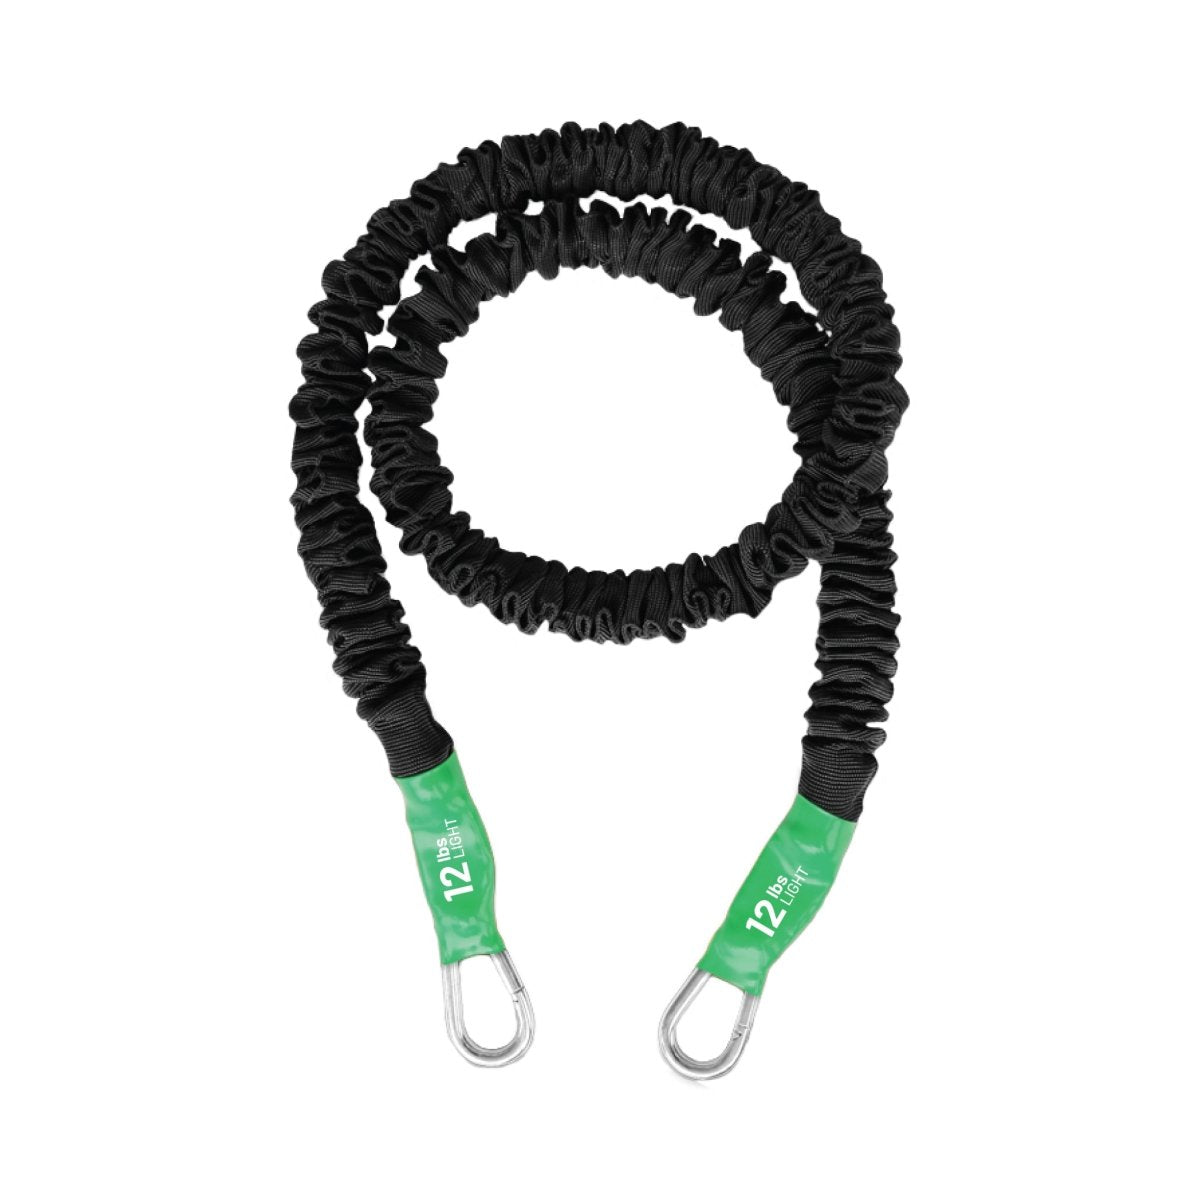 12lb Light Resistance Stackable tension bands with clip on each end. this bungee style resistance cord is designed for all workouts, exercise routine and fitness journey. covered, sheathed for your safety, to be anti-snap and long lasting. Best band on the market for a High resistance tension tube workout